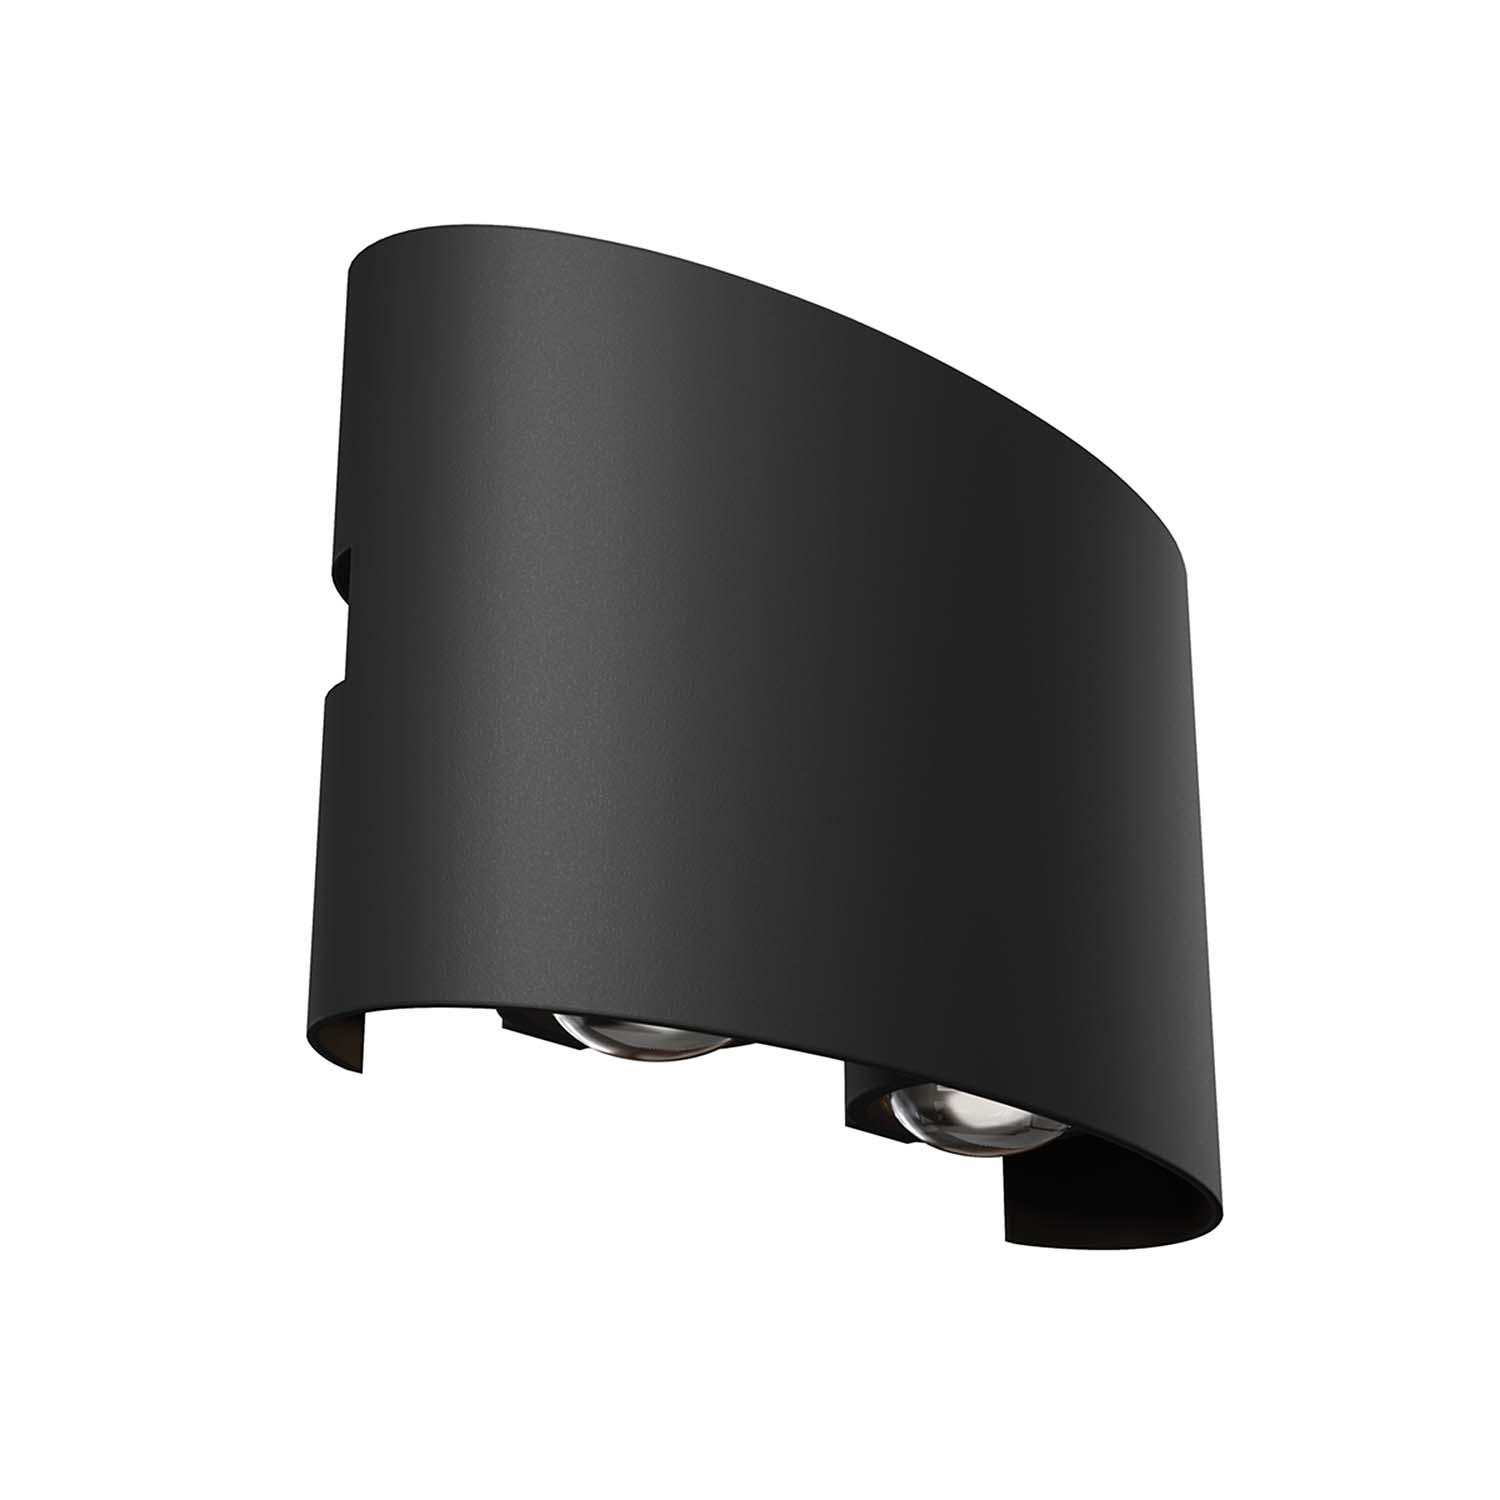 STRATO - Outdoor wall light, design and waterproof